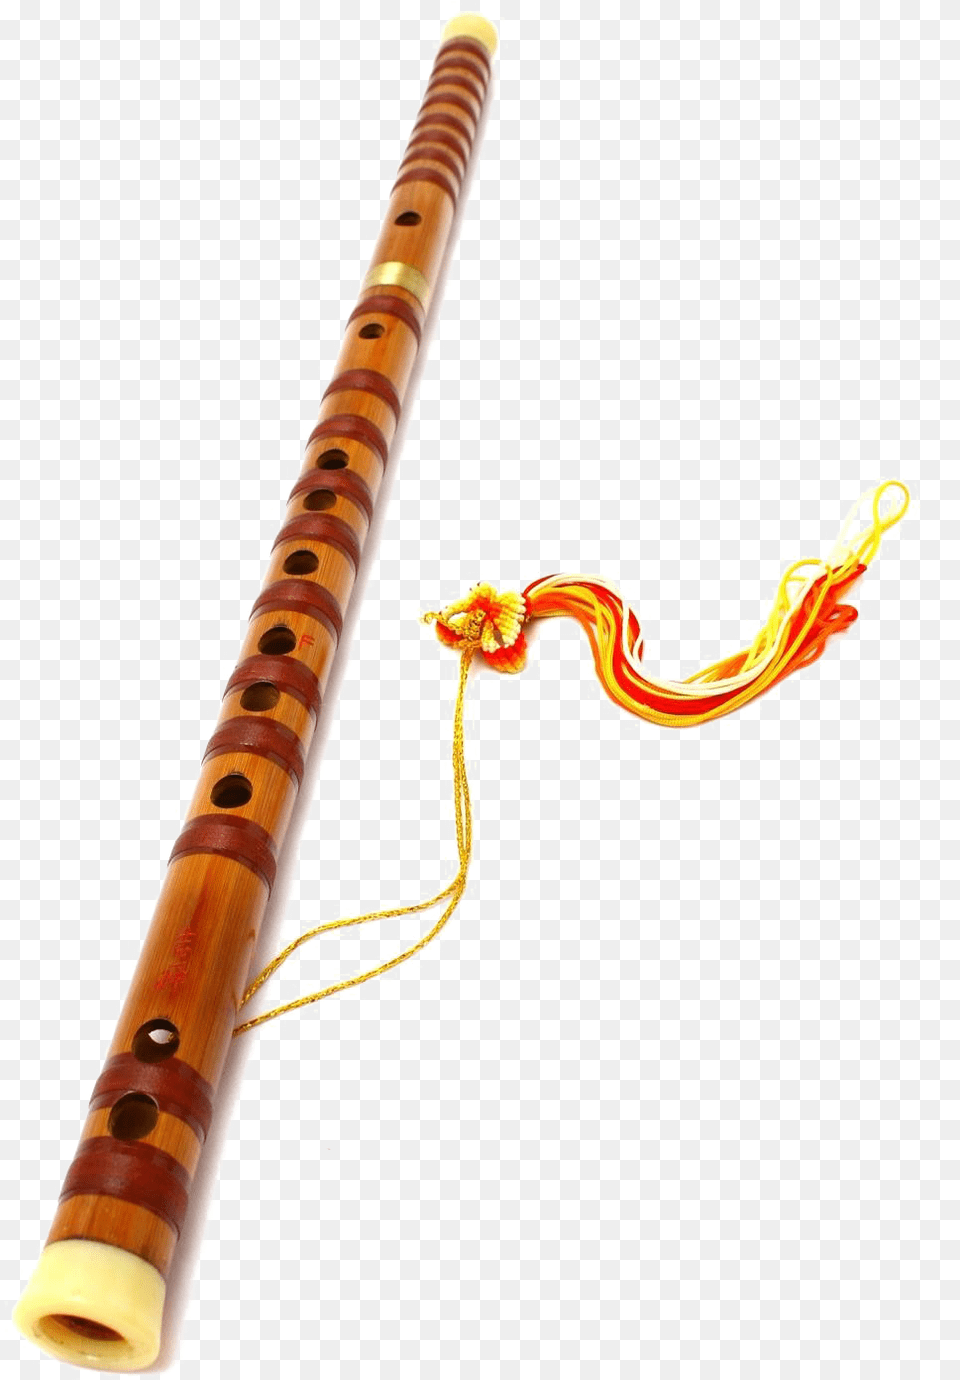 Flute Image File Chinese Bamboo Flute, Musical Instrument, Rocket, Weapon Png